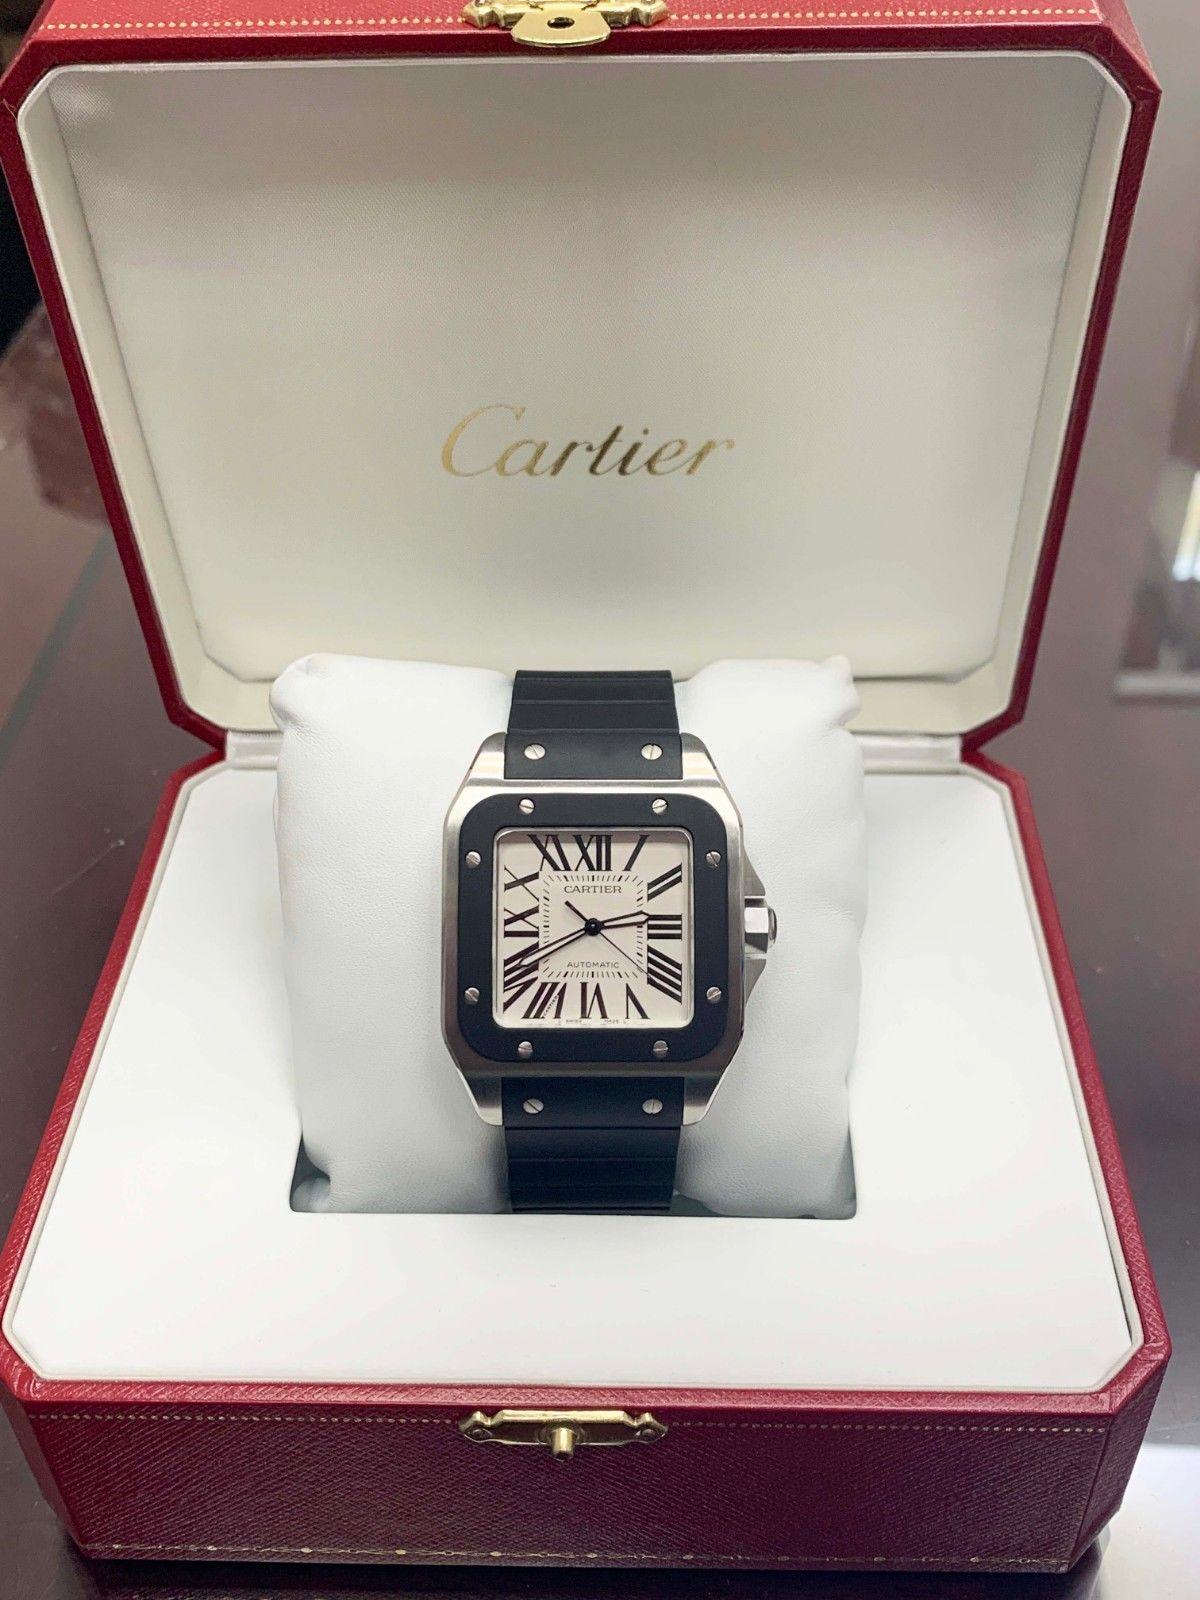 Reference Number: 3774
Model: Santos 100
Case Material: Stainless Steel 
Band: Black Rubber
Bezel: Black Rubber 
Dial: Ivory / White 
Face: Sapphire Crystal 
Case Size: 38mm (without Crown) 
Includes: 
-Cartier Box & Papers
-Certified Appraisal 
-6